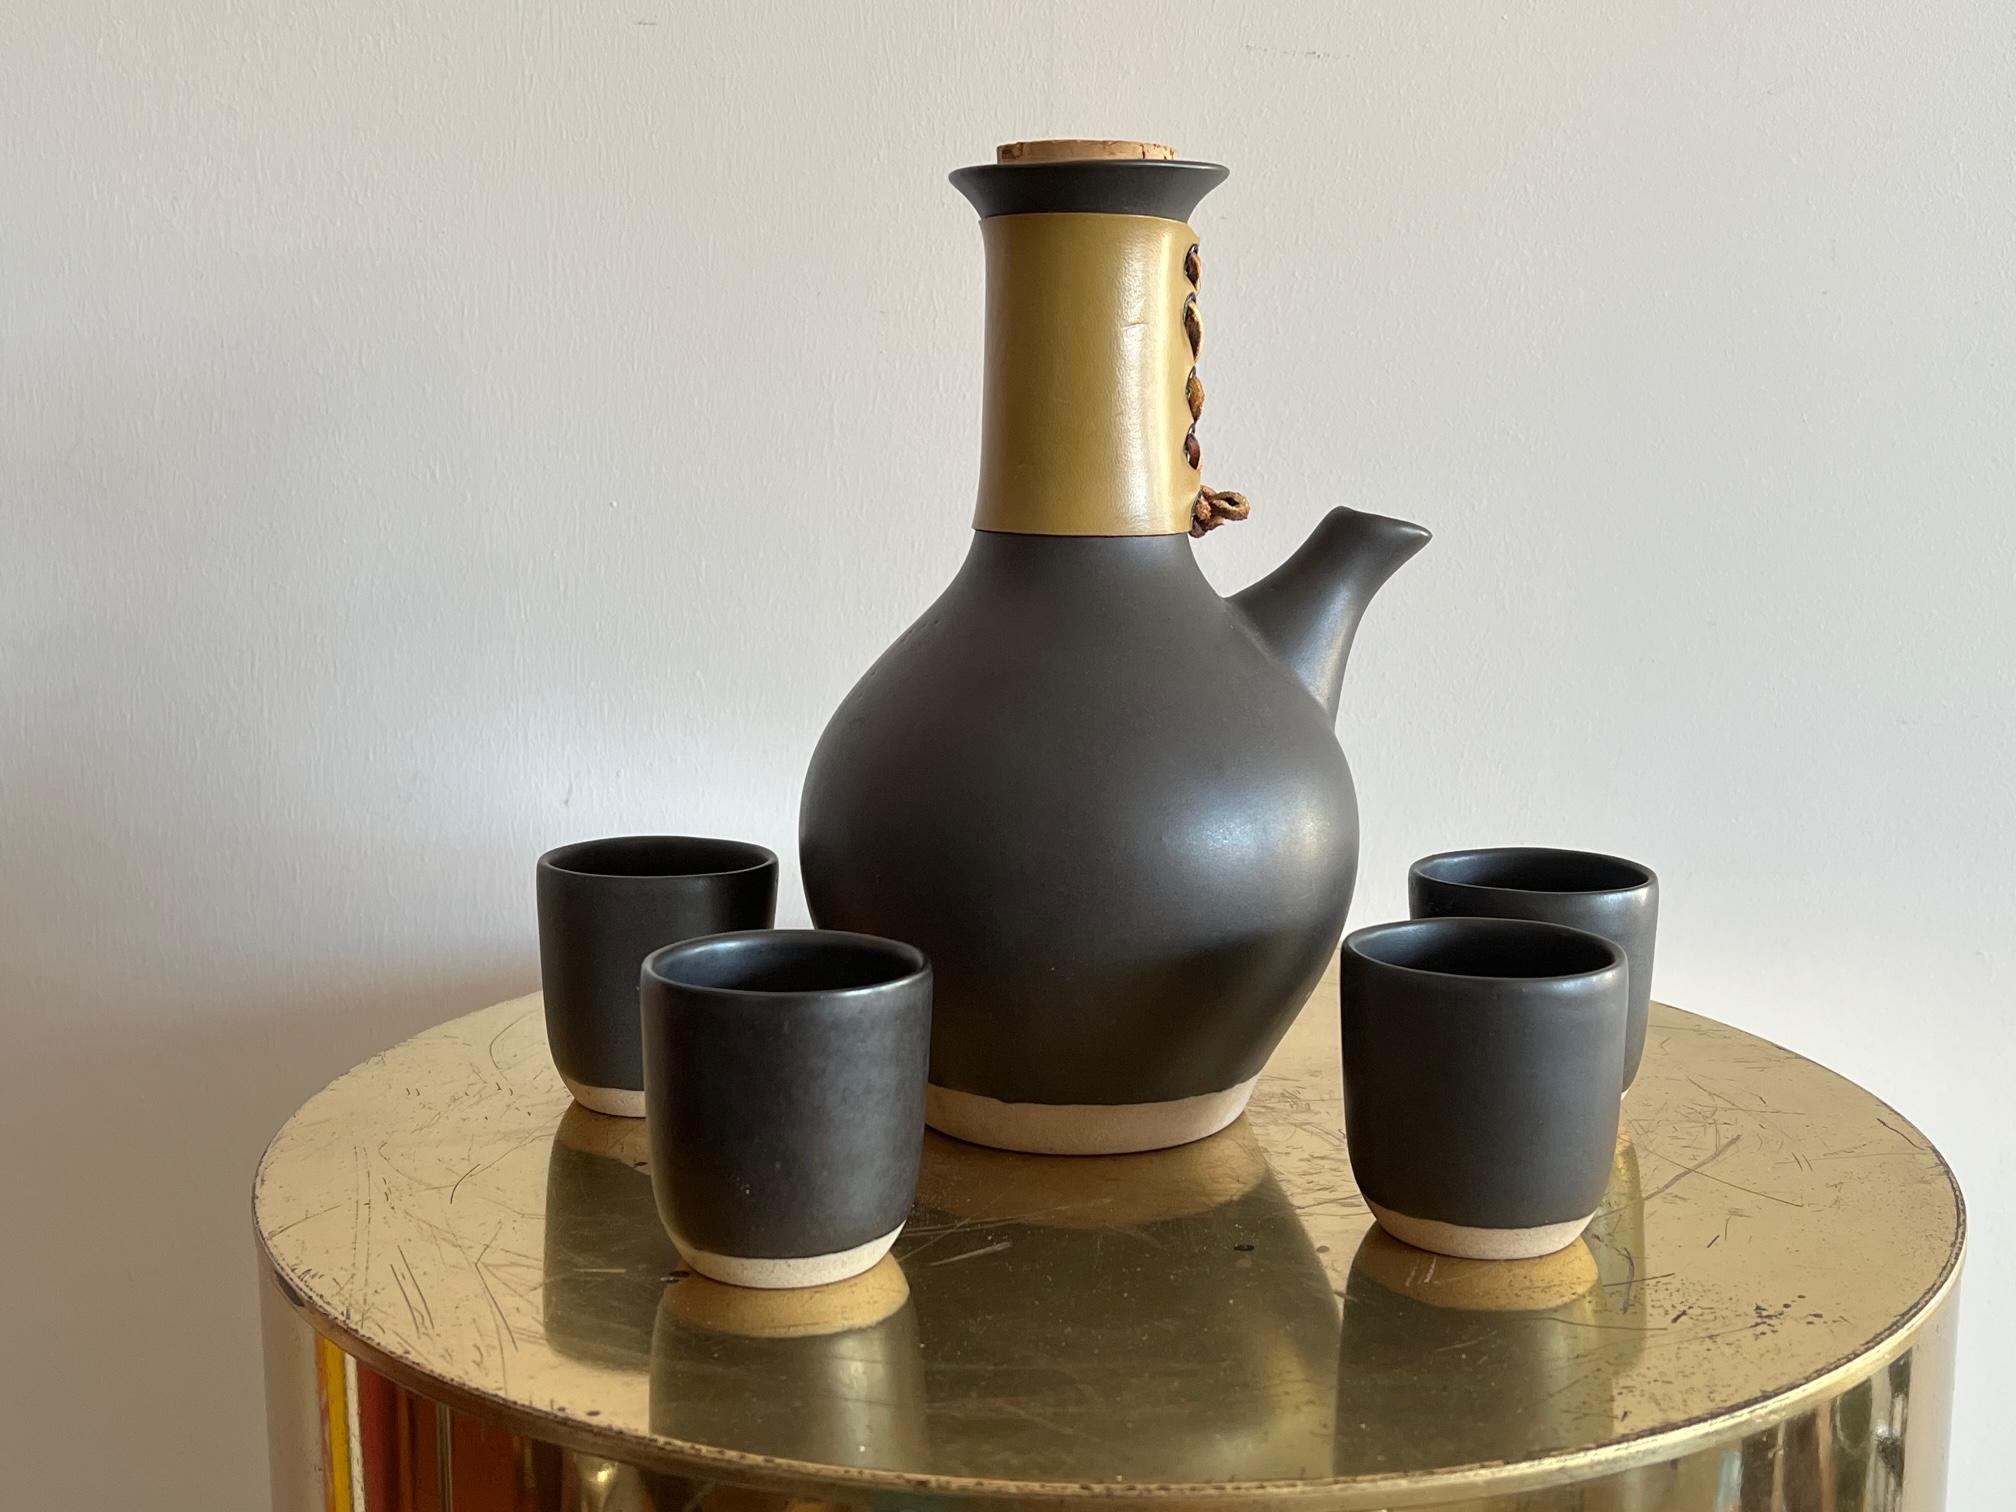 An elegant coffee or tea set by Marshall Studios/Martz consisting of a large coffee pot with leather holder and four matching cups. Beautiful dark brown/almost black glaze, handmade. Measures: The pot is approx. 10